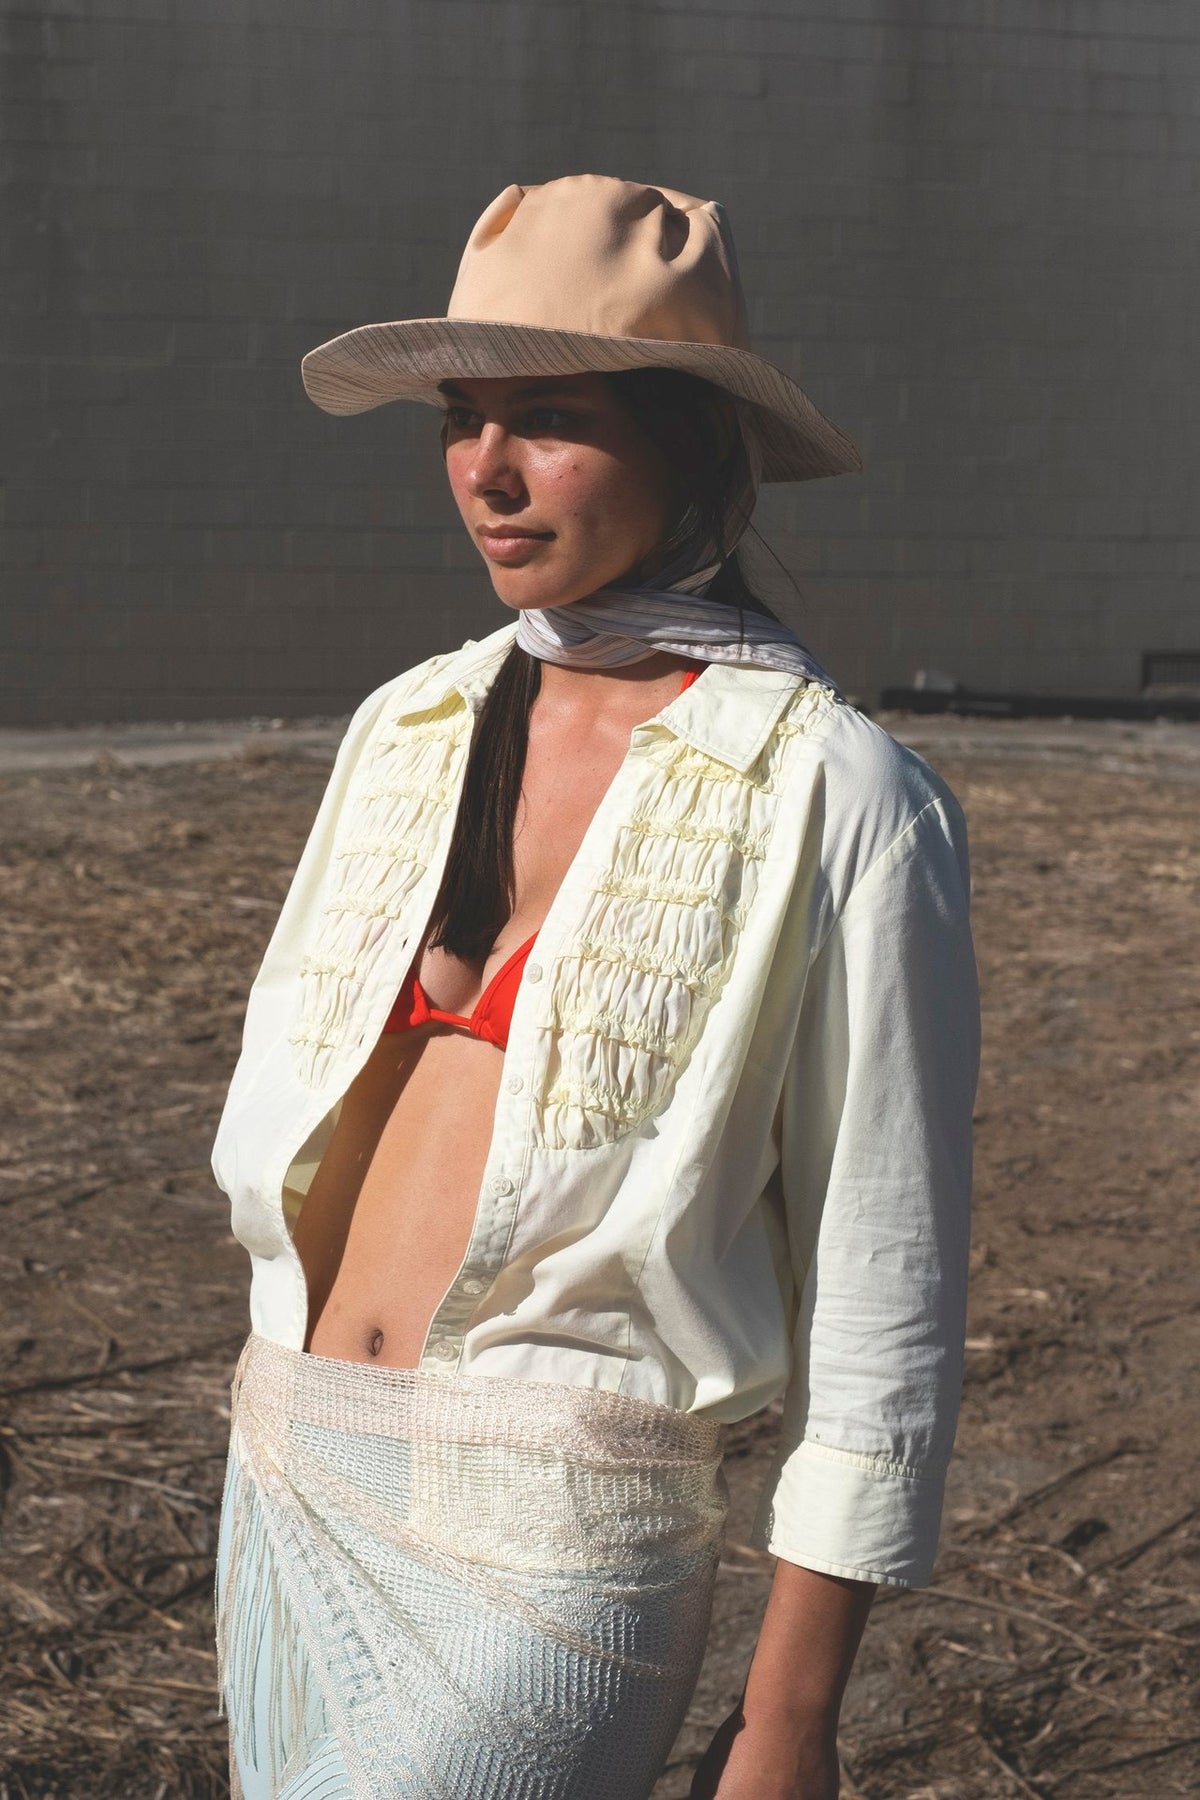 A woman in a Classic Brim with Wide Ties – Peach &amp; Stripe hat, by Companion, standing in a dirt field.